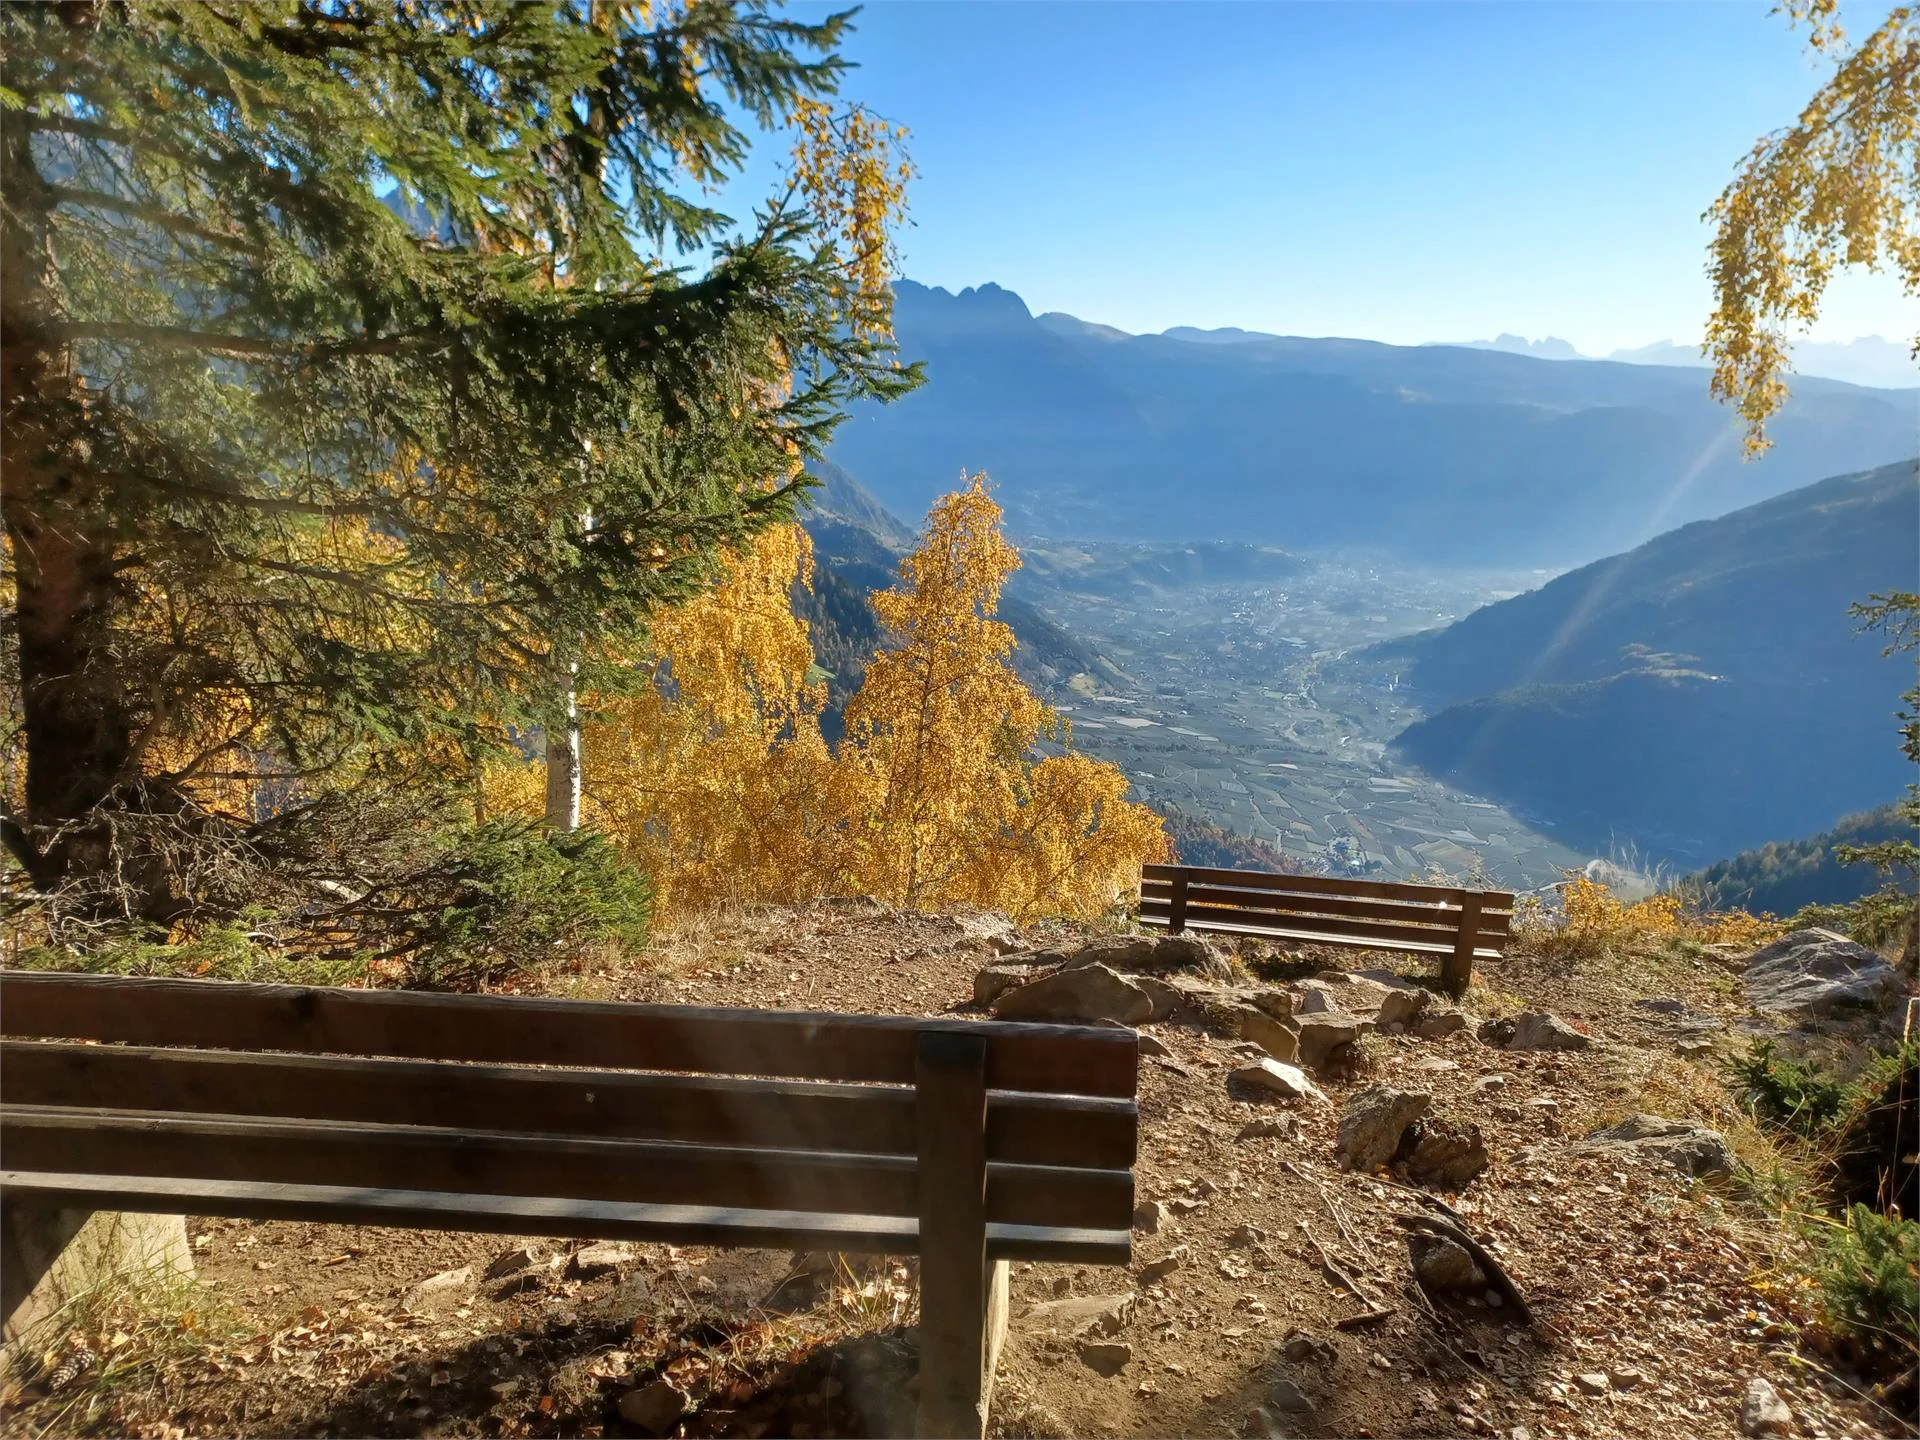 On the Merano High Mountain Trail to the Alpine hiking trail Waterfall Partschins/Parcines 1 suedtirol.info